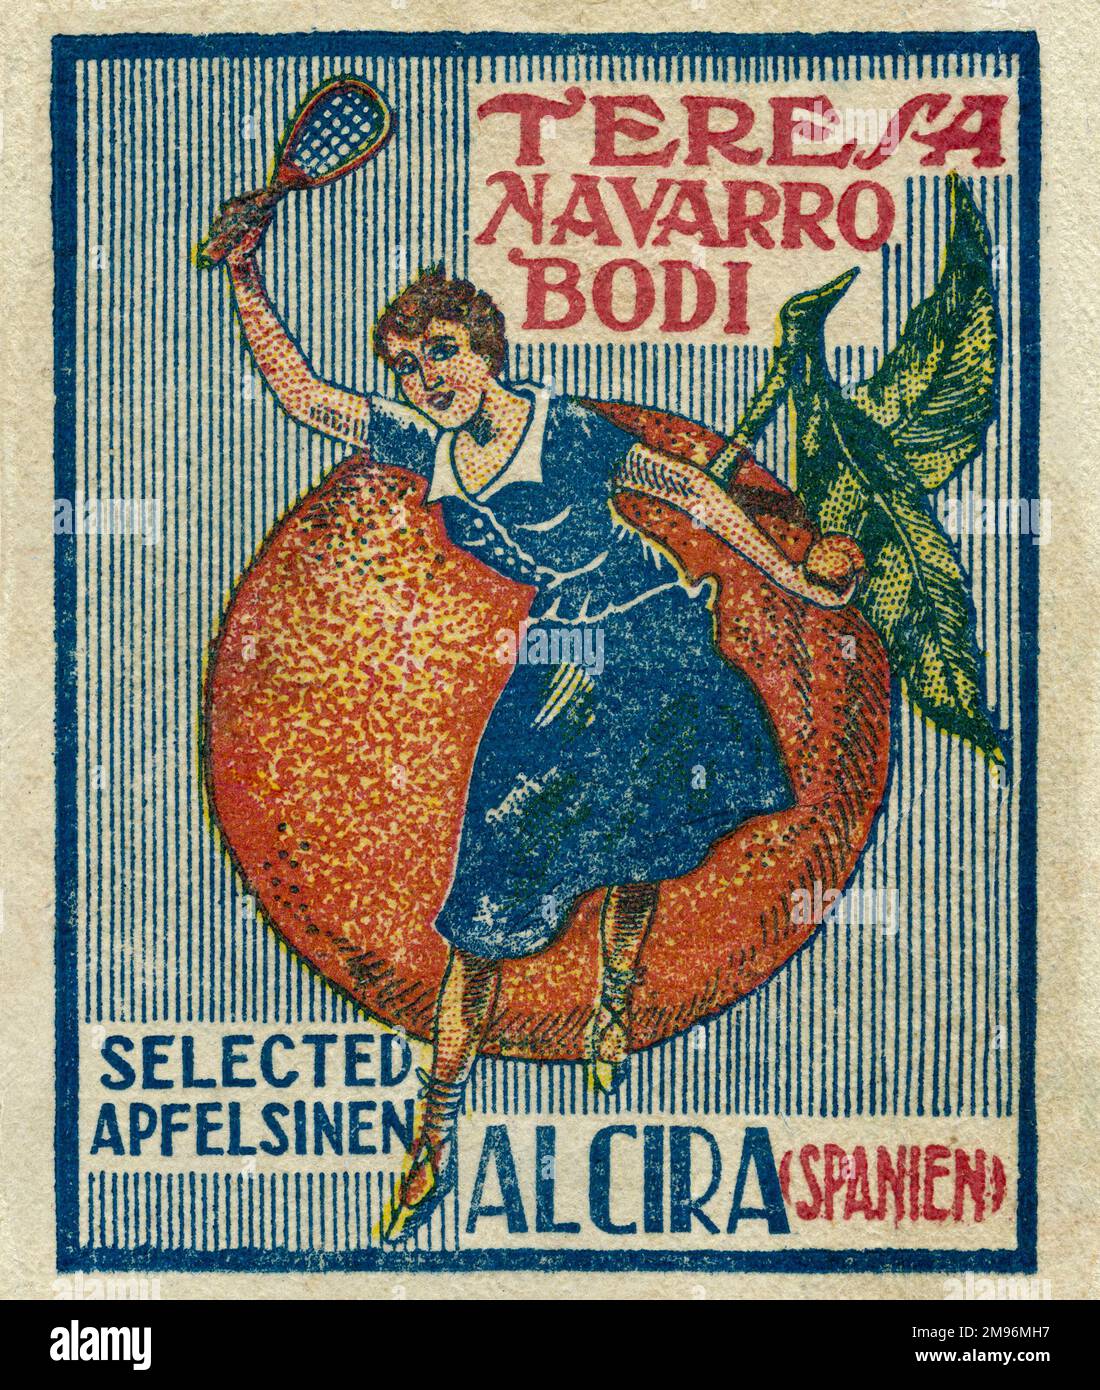 Fruit Label -- Teresa Navarro Bodi selected oranges (or orange cider) from Alcira, Valencia, Spain (in German).  Depicting a woman in a blue dress with a bat in one hand and an orange in the other, standing in front of a giant orange. Stock Photo